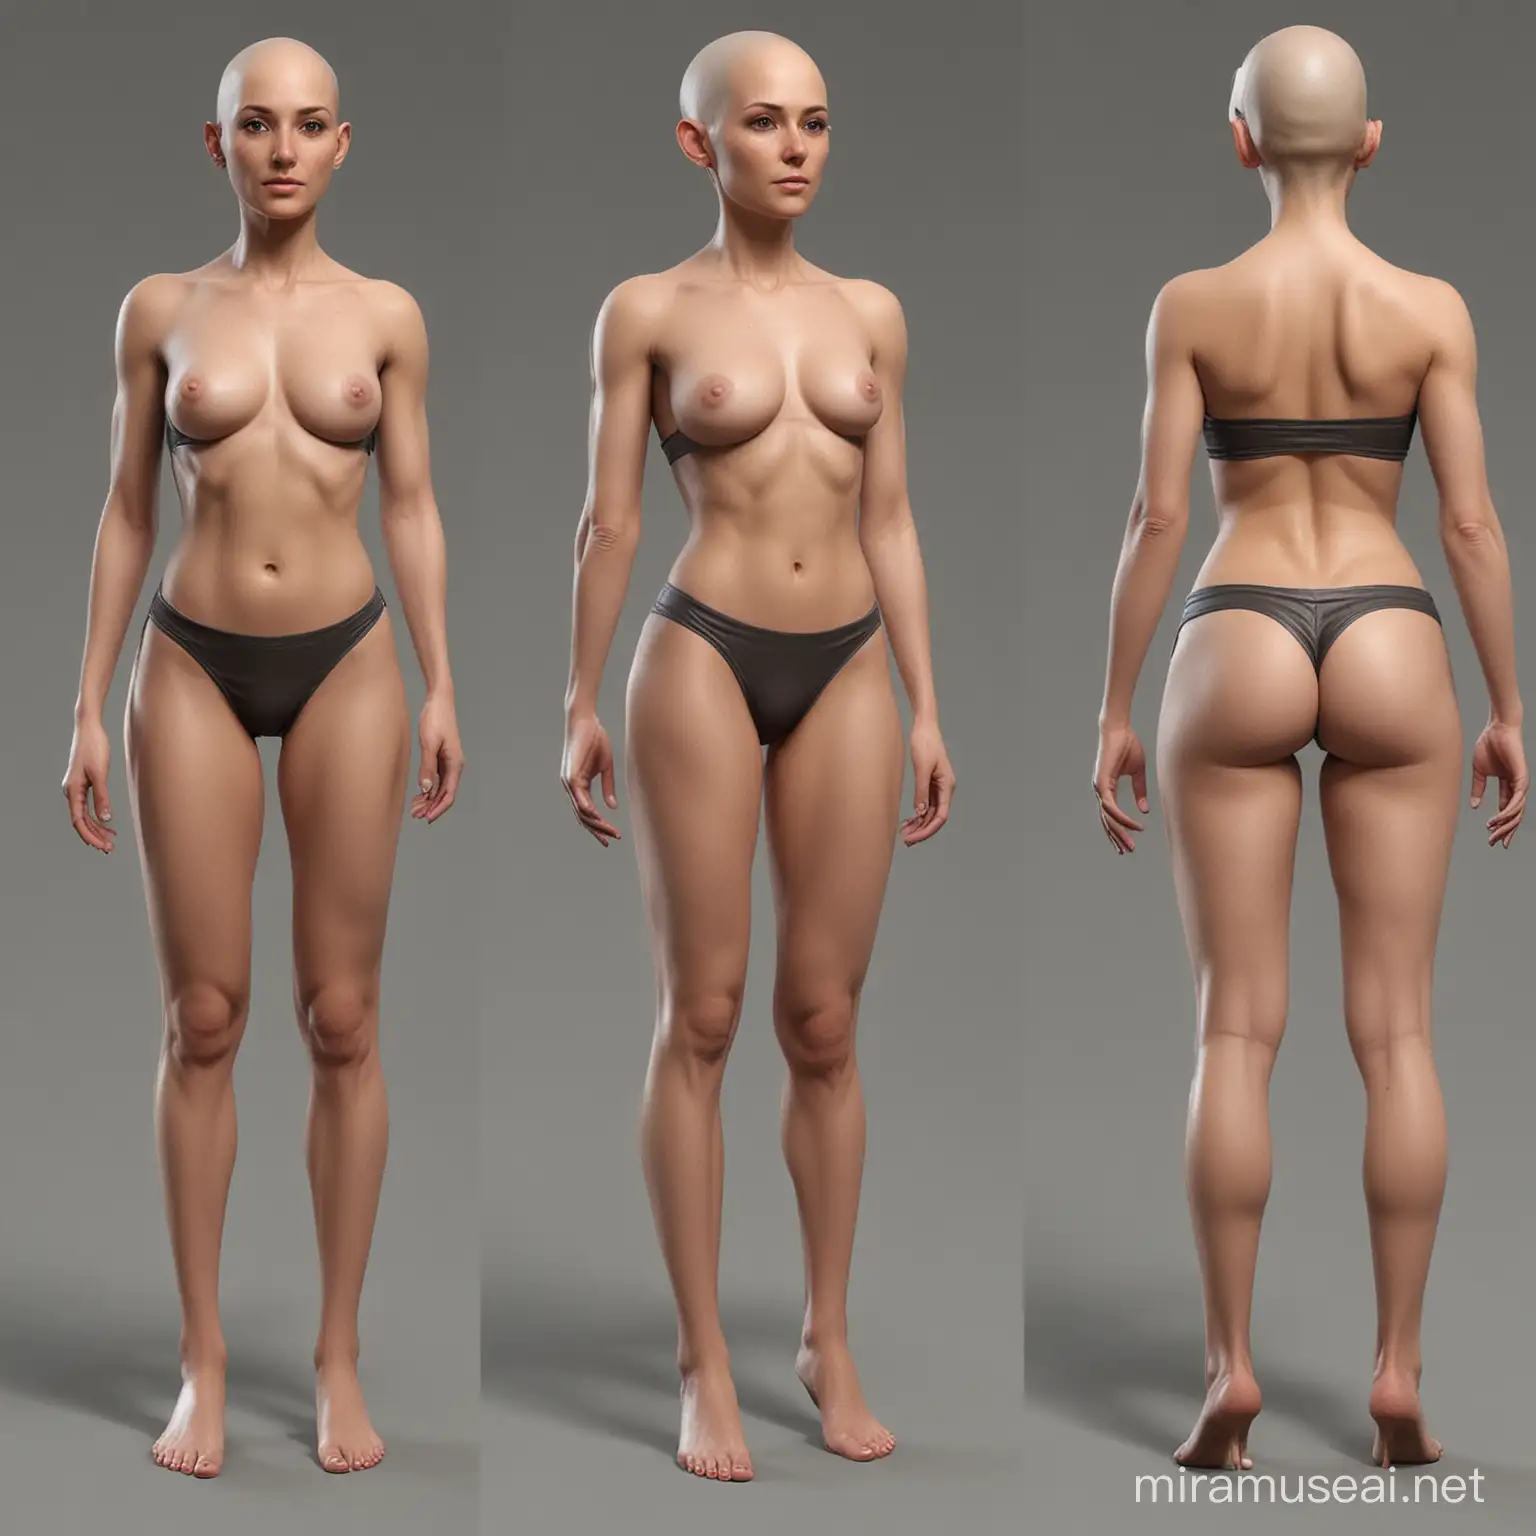 Woman Character Sheet Orthographic Modeling Reference with No Hair Full Body Front and Side Views